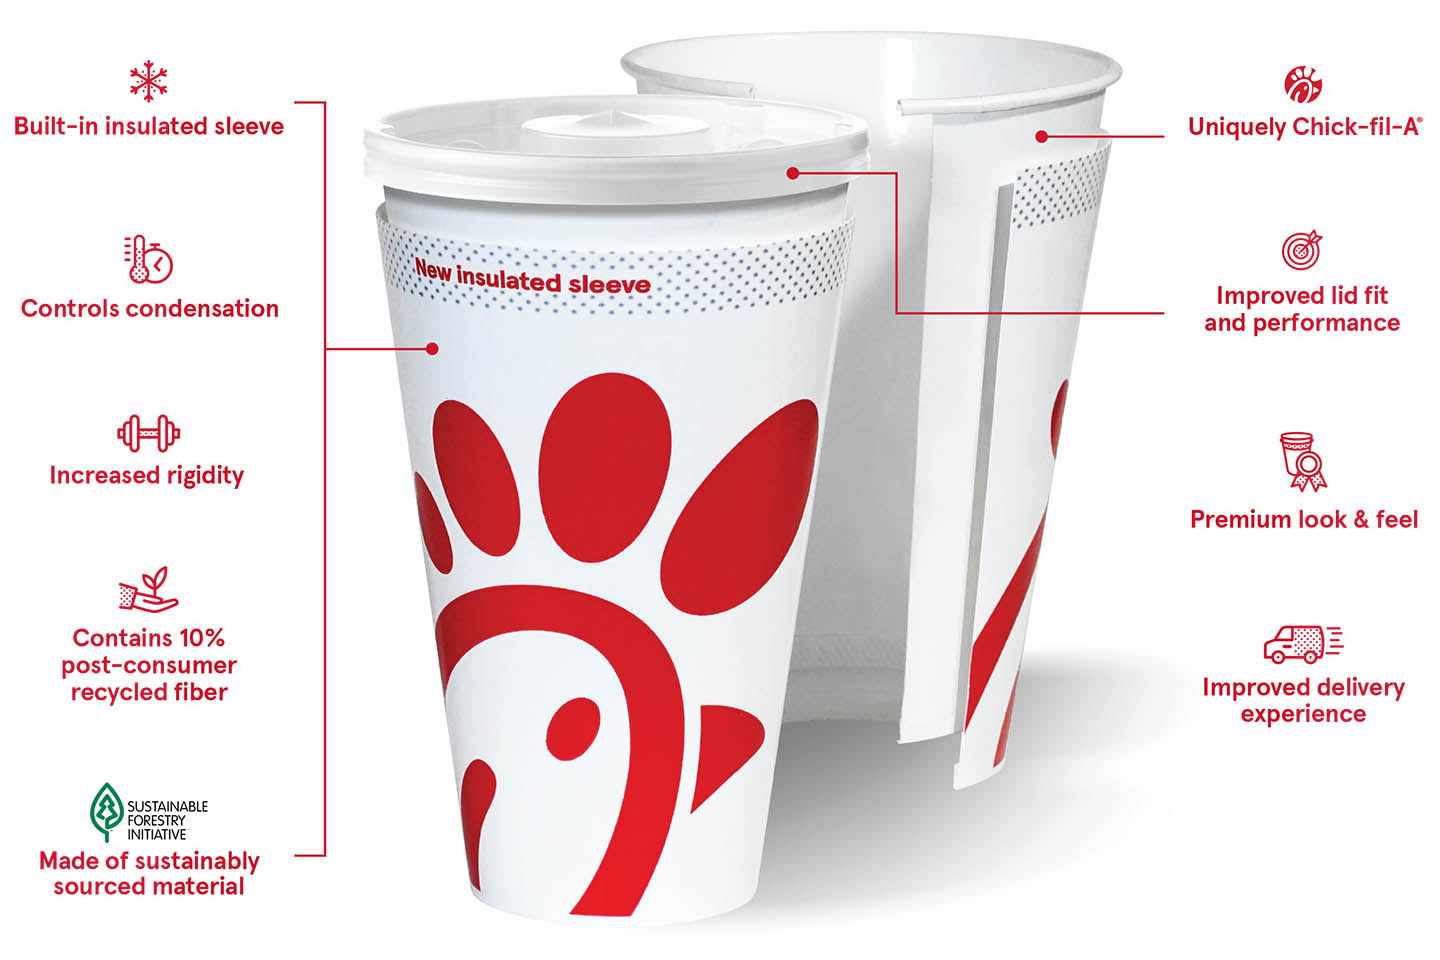 Chick-fil-A tackles PET plastic cups by replacing it with recyclable cups